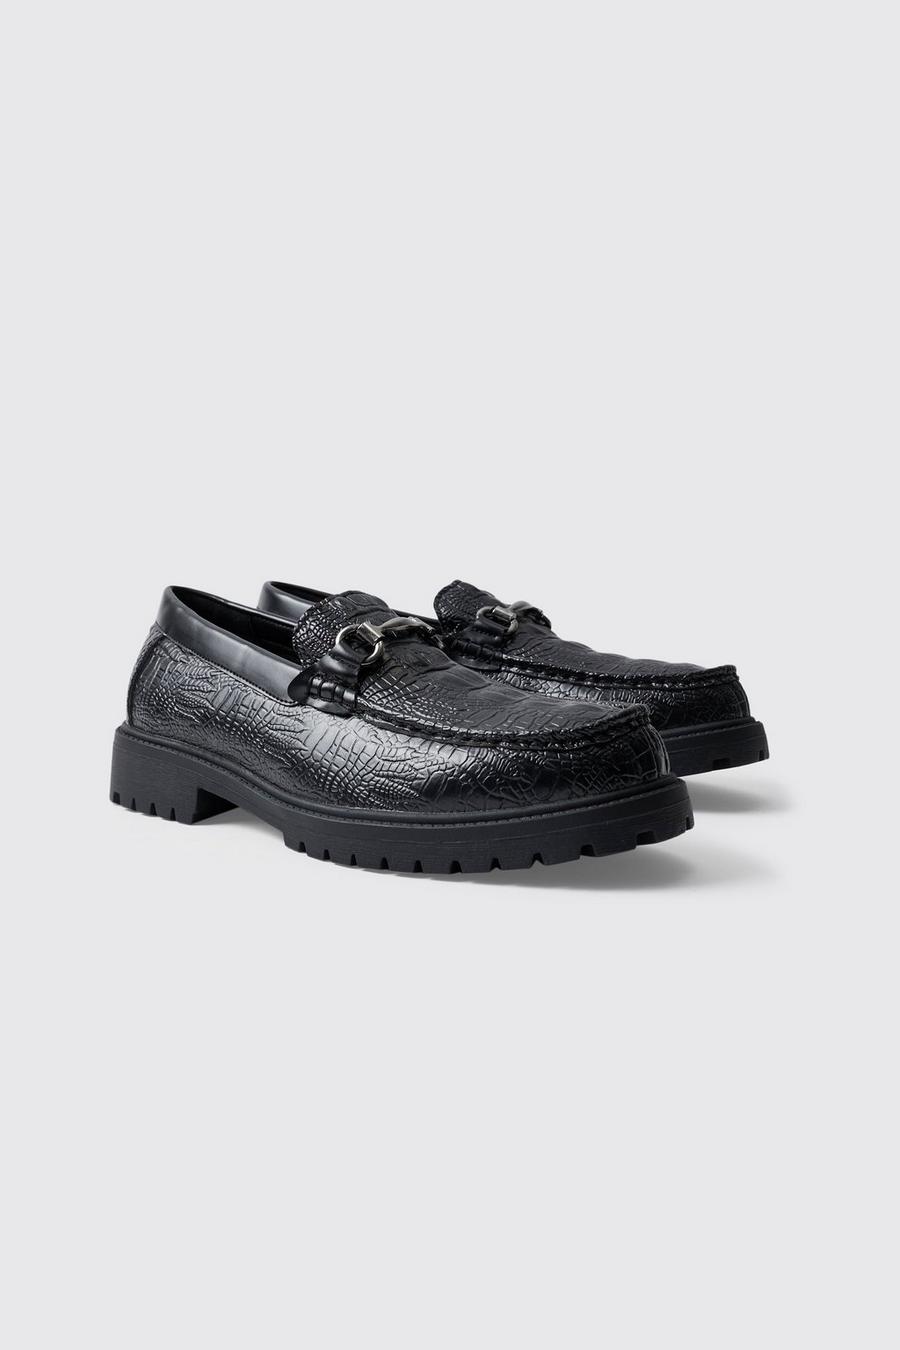 Black Croc Loafer With Tread Sole